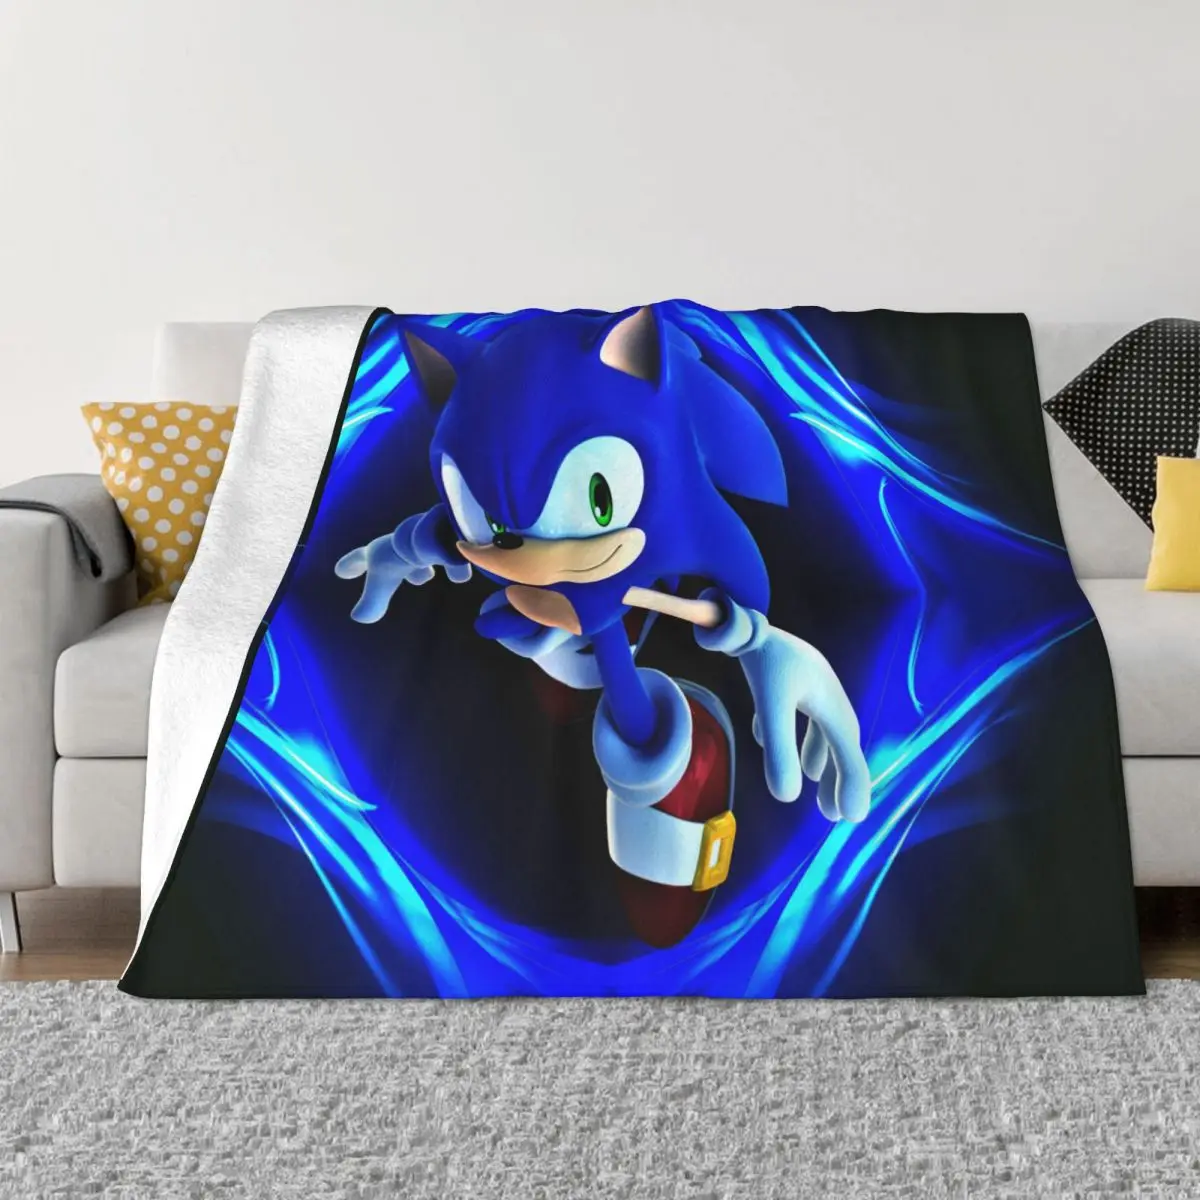 Sonics The Hedgehog Blanket 3D Print Soft Flannel Fleece Warm Cartoon Game Throw Blankets for Car Bed Couch Quilt